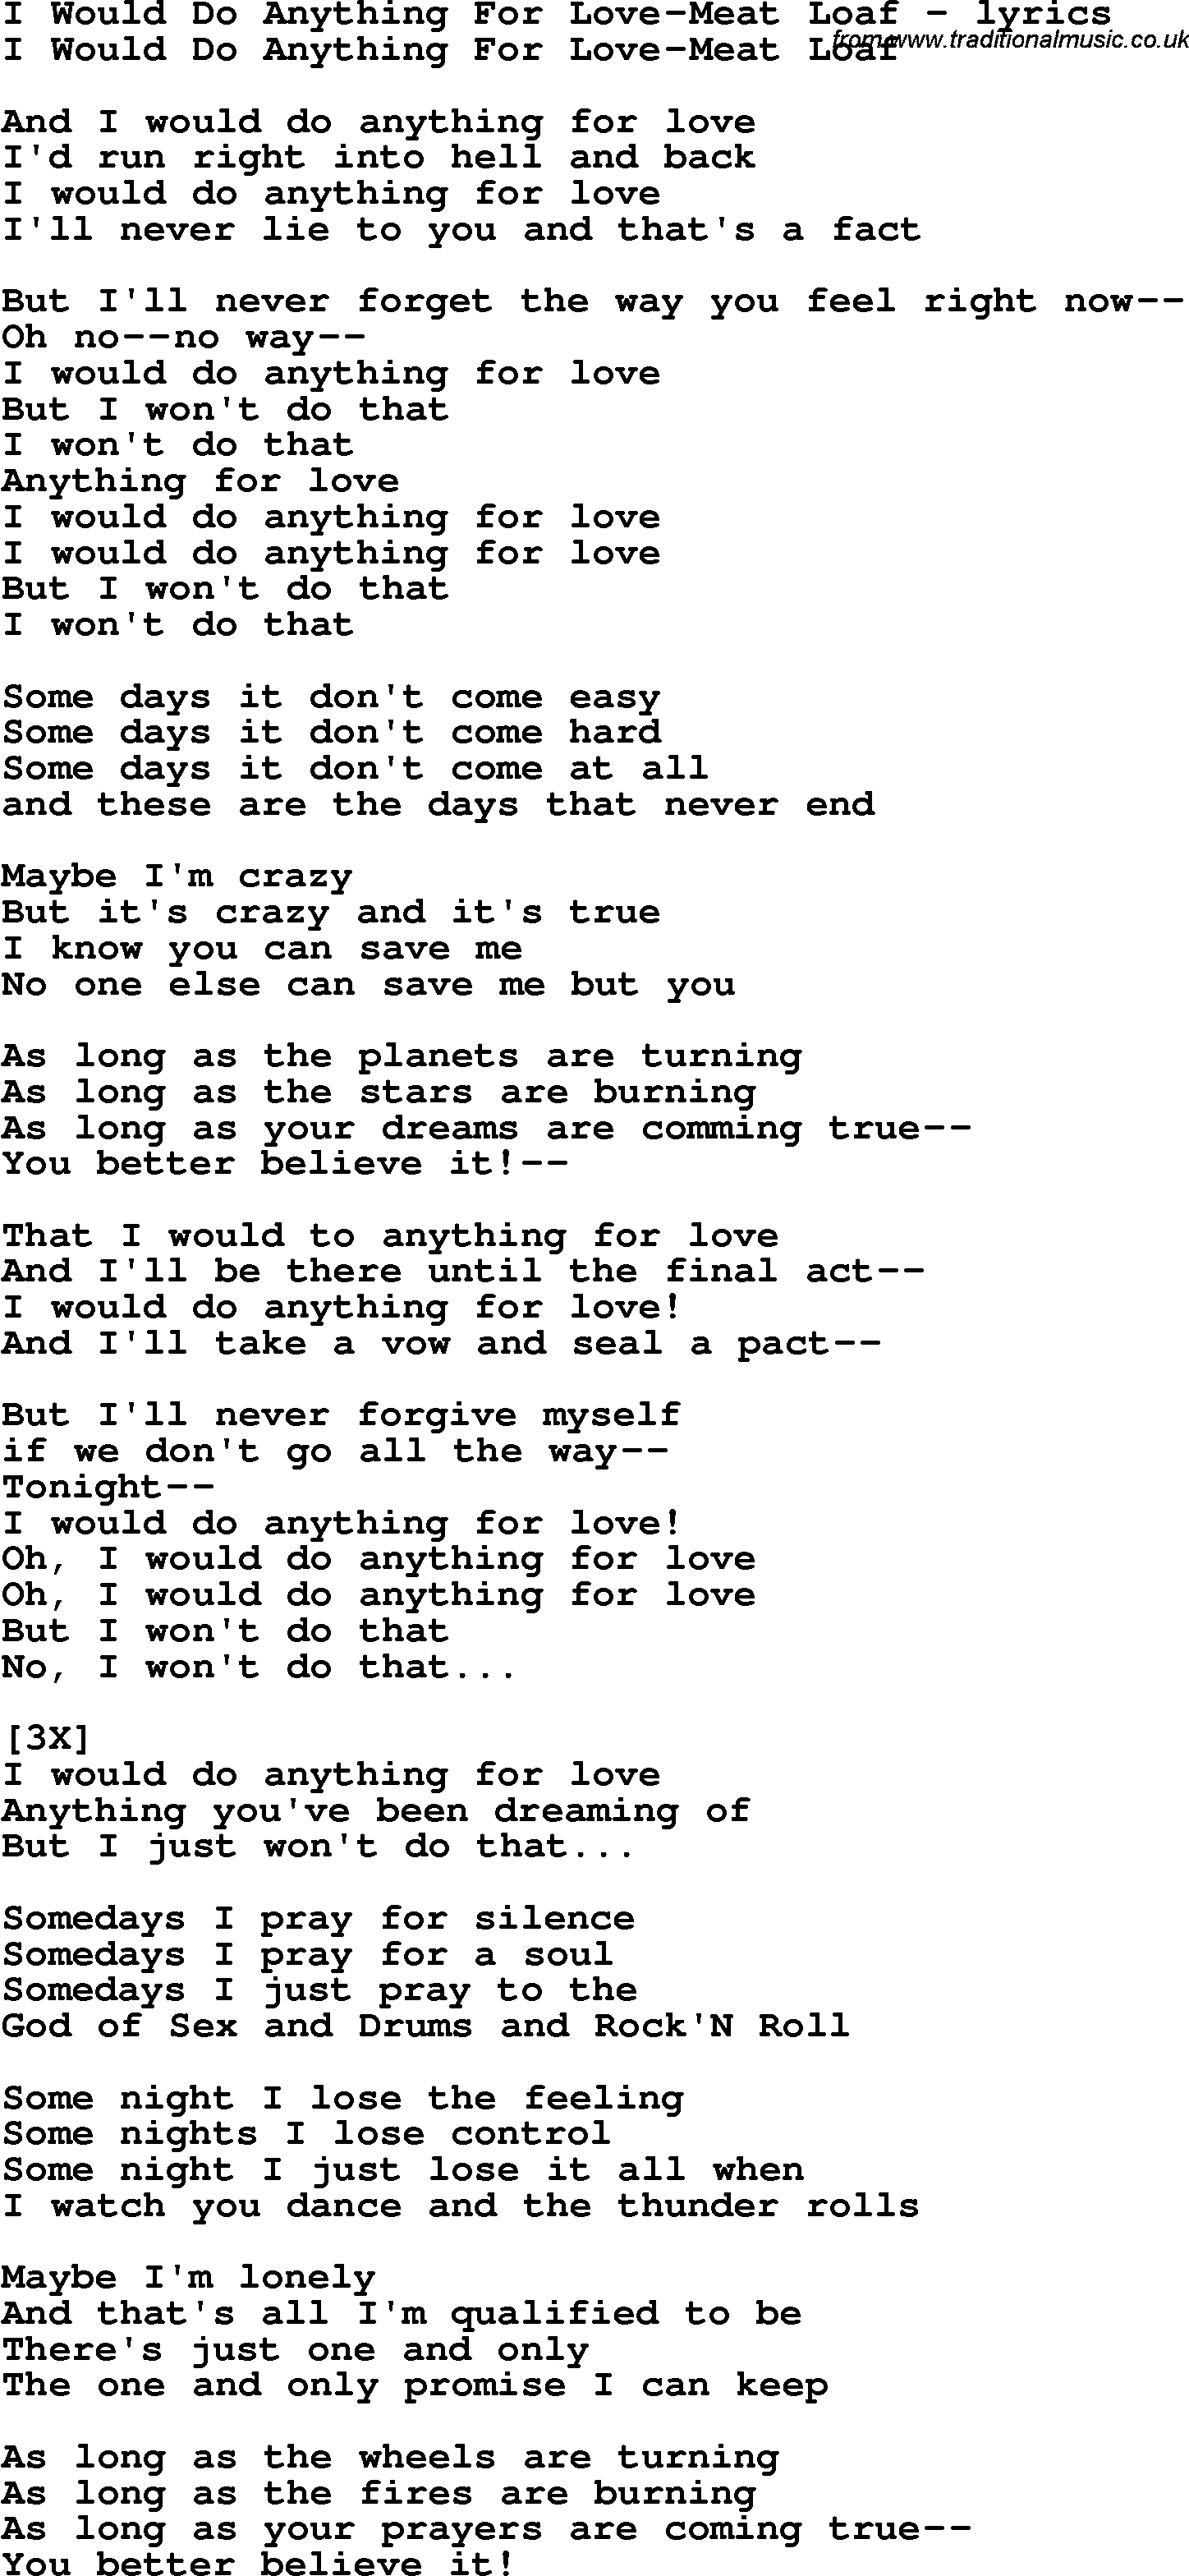 Love Song Lyrics for: I Would Do Anything For Love-Meat Loaf